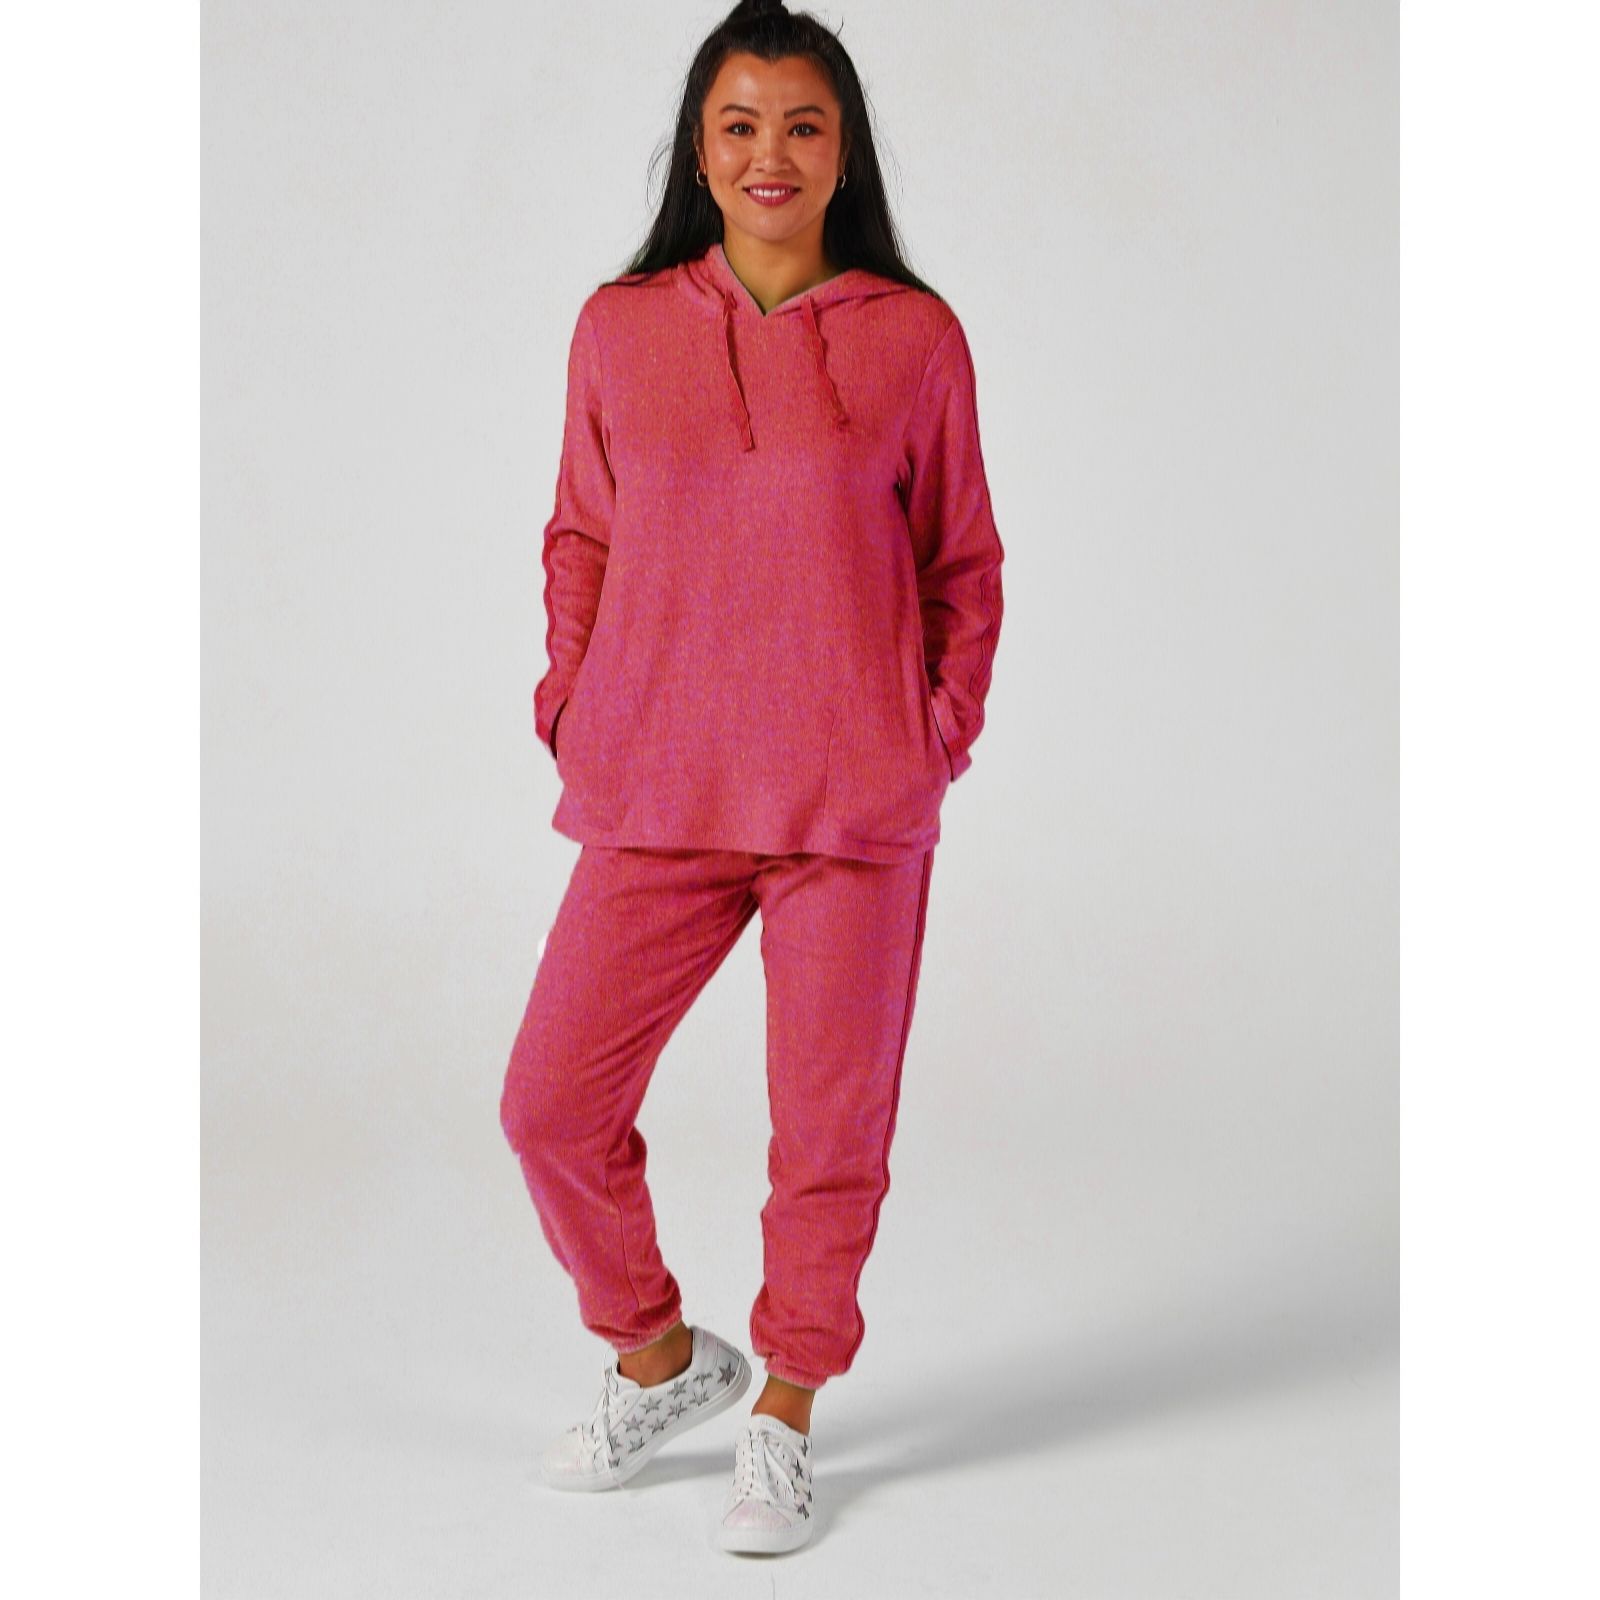 Spanx Fans Love This Cozy Loungewear Set